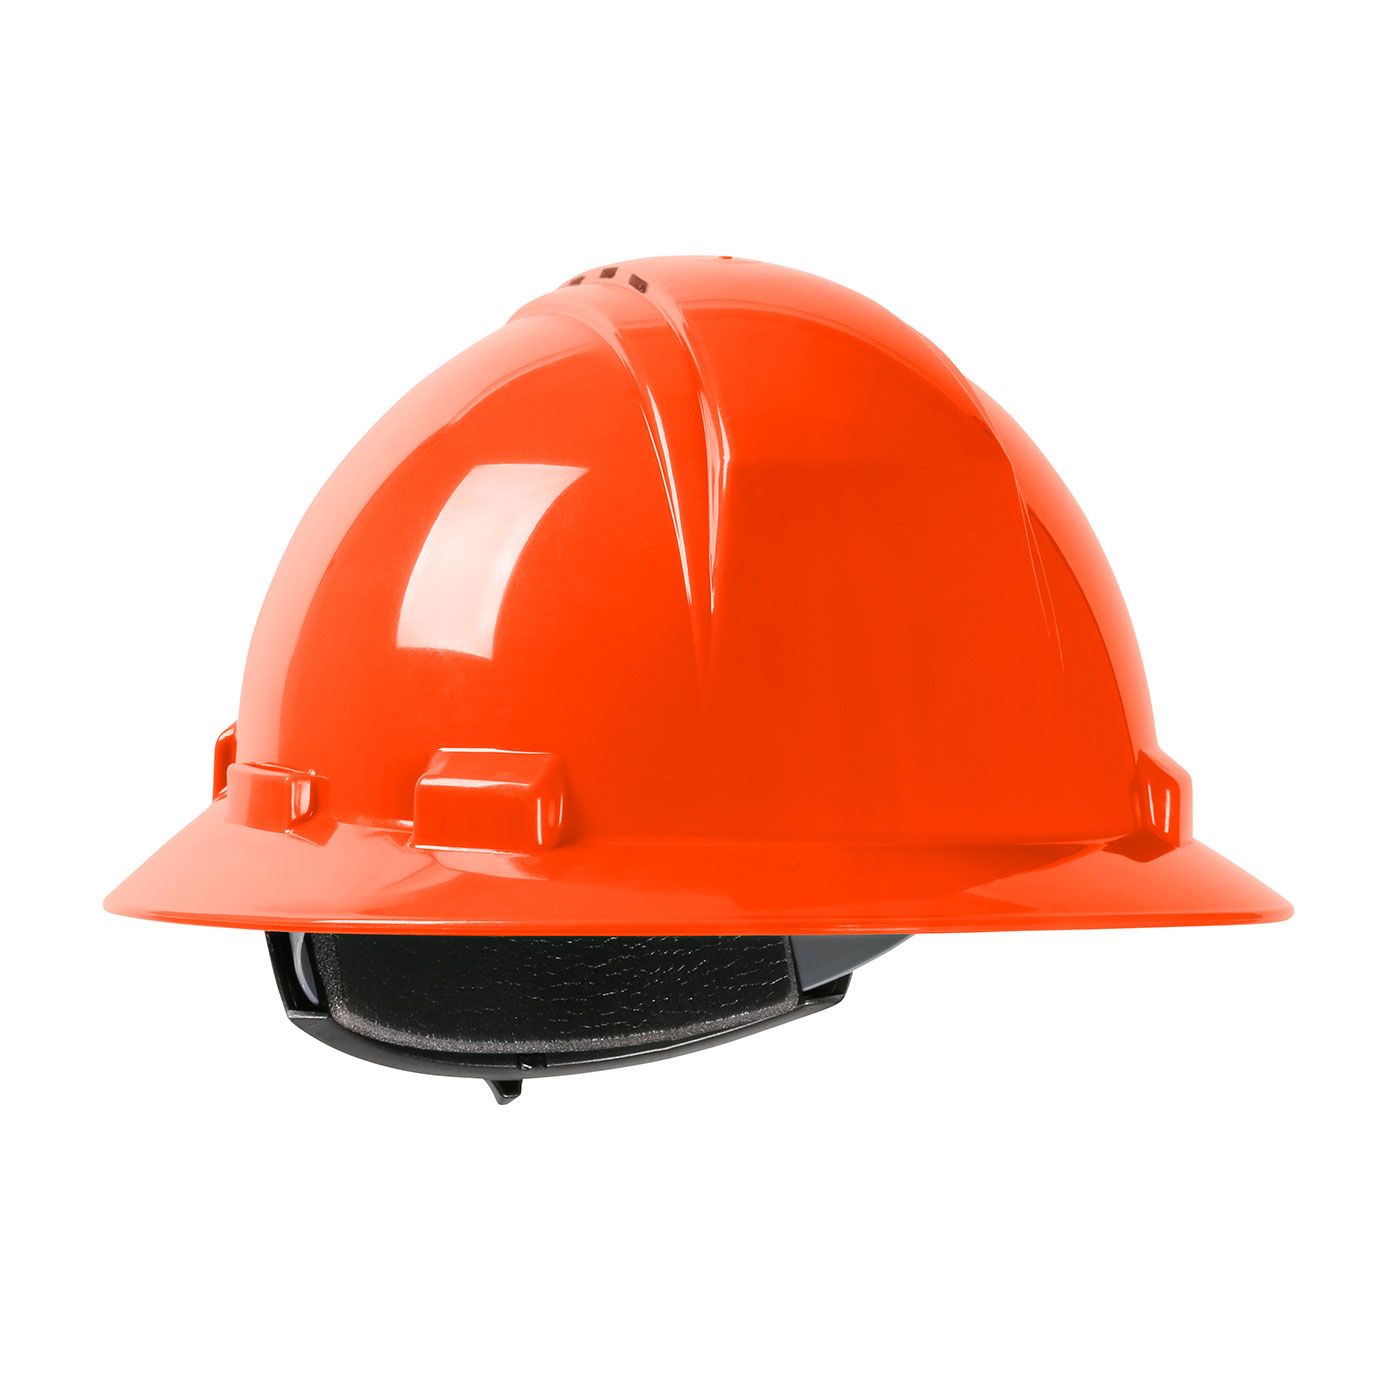 280-HP261RV PIP® Dynamic Kilimanjaro™ Vented Full Brim Hard Hat with HDPE Shell, 4-Point Textile Suspension and Wheel Ratchet Adjustment - Orange